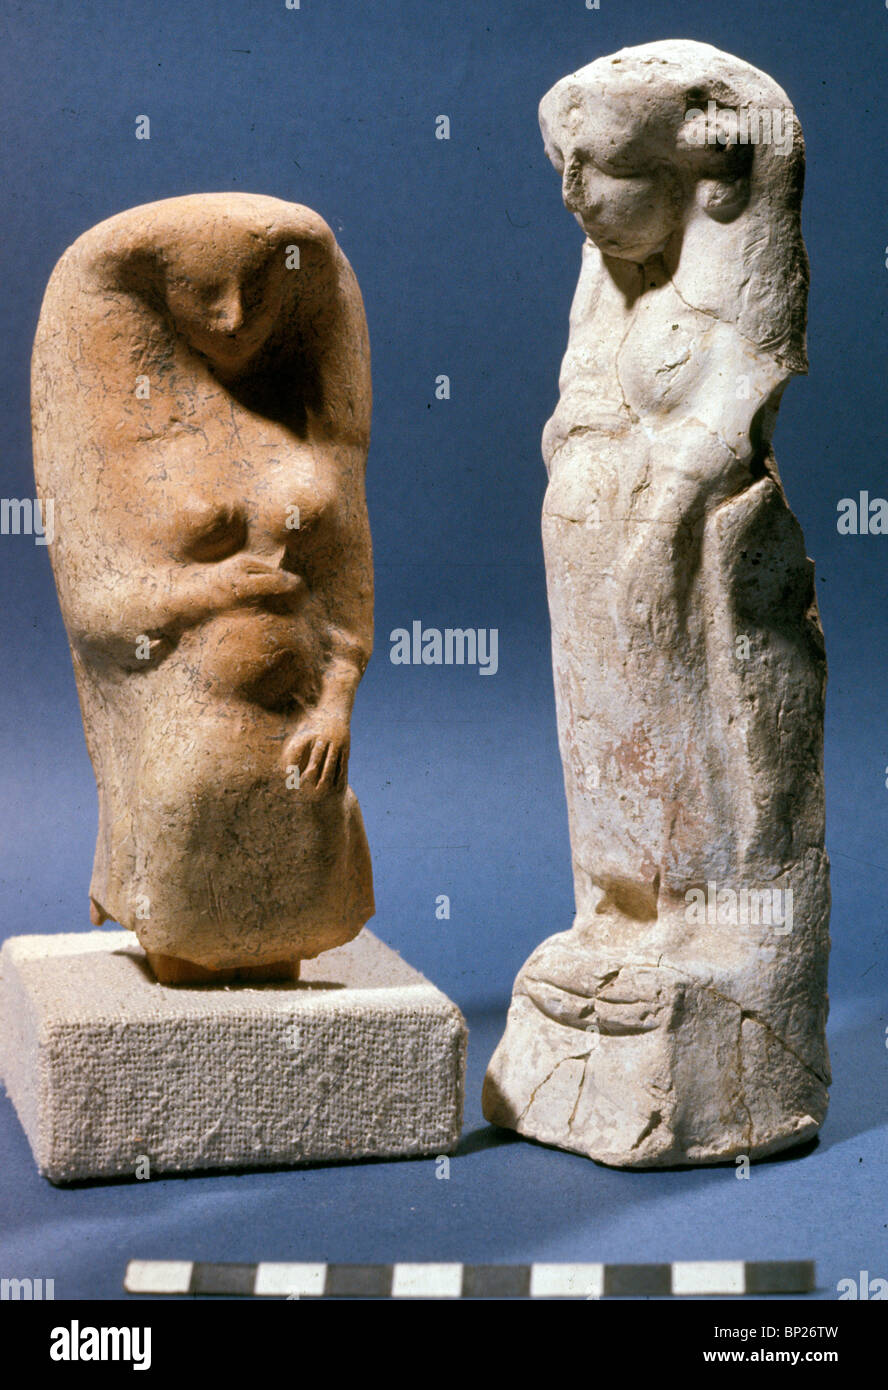 CLAY FIGURINE OF A PREGNANT WOMAN DATING FROM THE 7 - 6TH. C. B.C. FOUND IN DIFFERENT SITES CONNECTED WITH PHOENICIAN CULTURE. Stock Photo